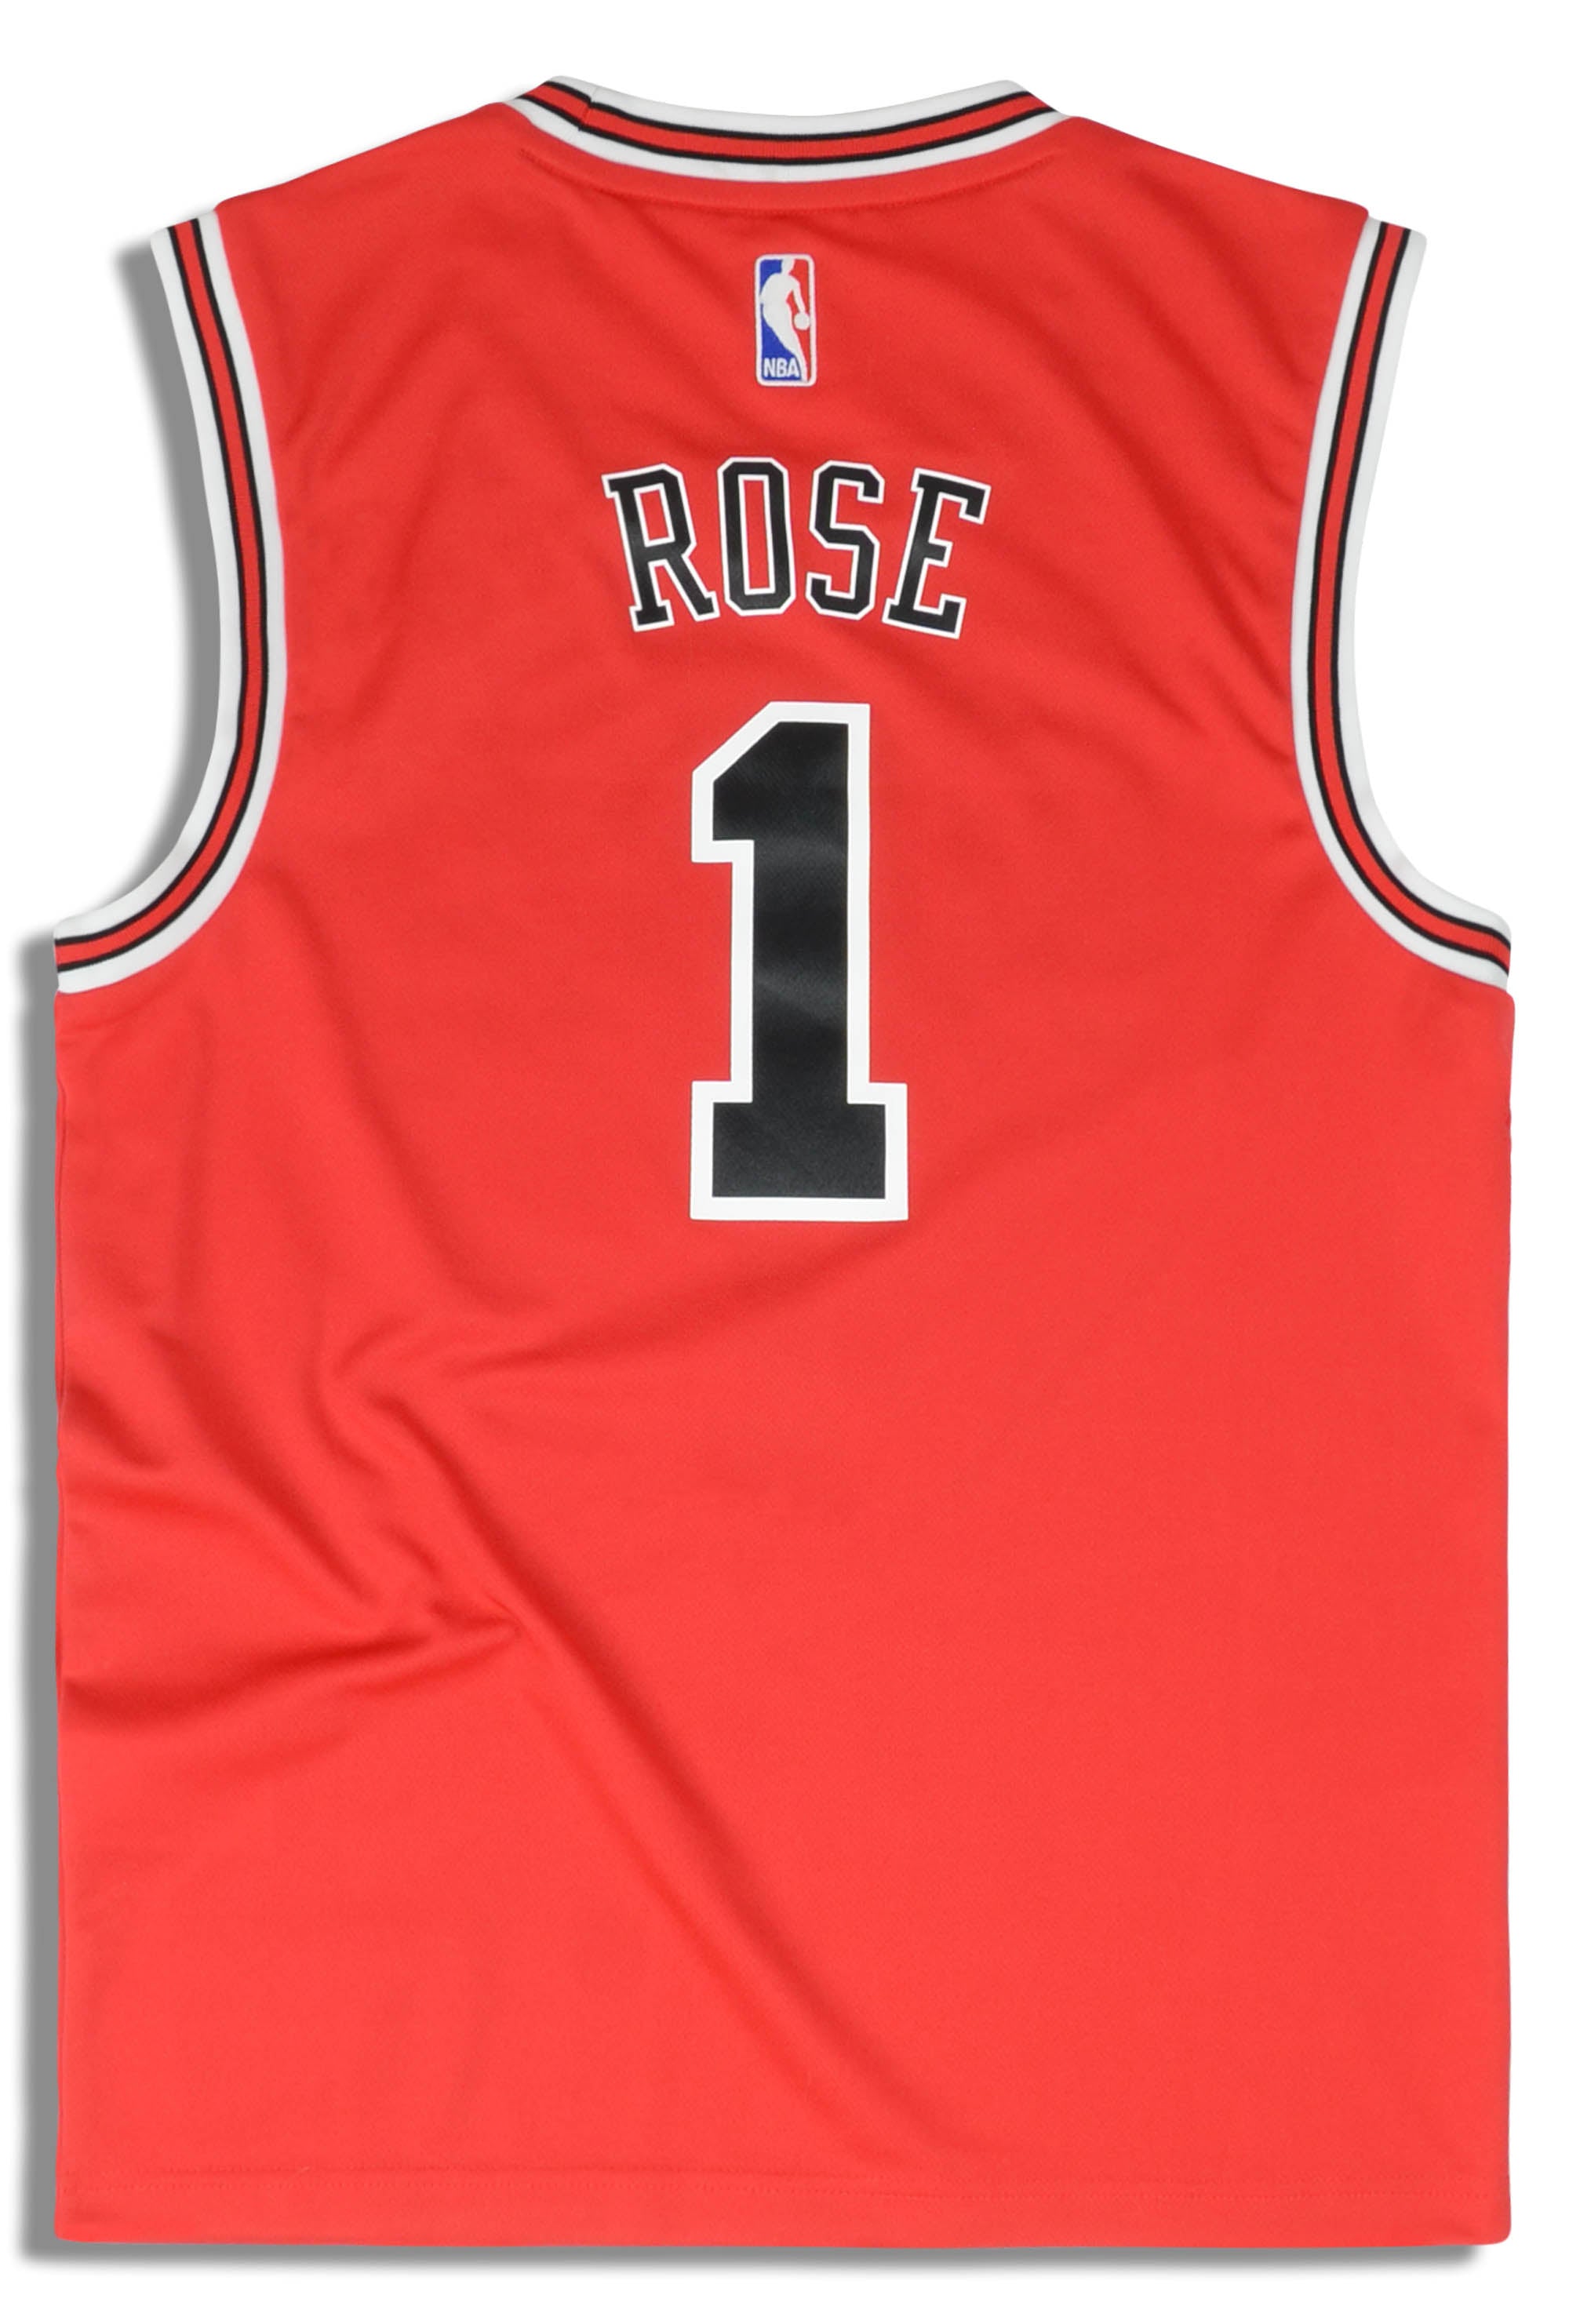 Derrick Rose Chicago Bulls adidas Youth Replica Home Jersey - White